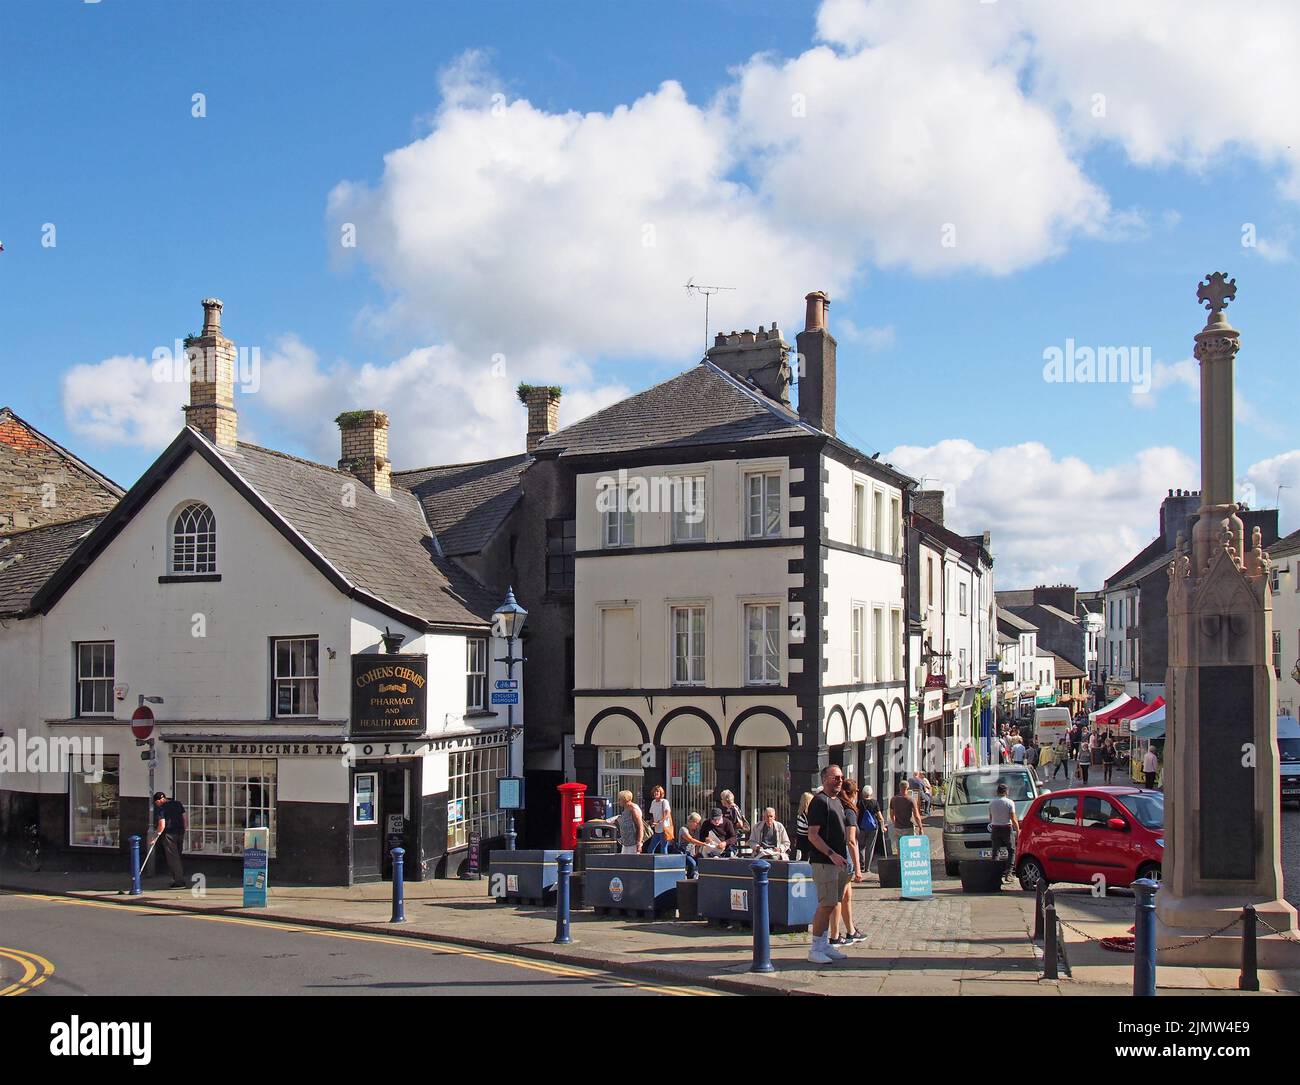 View of the town centre in ulverston cumbria with people walking past shops and the weekly market Stock Photo